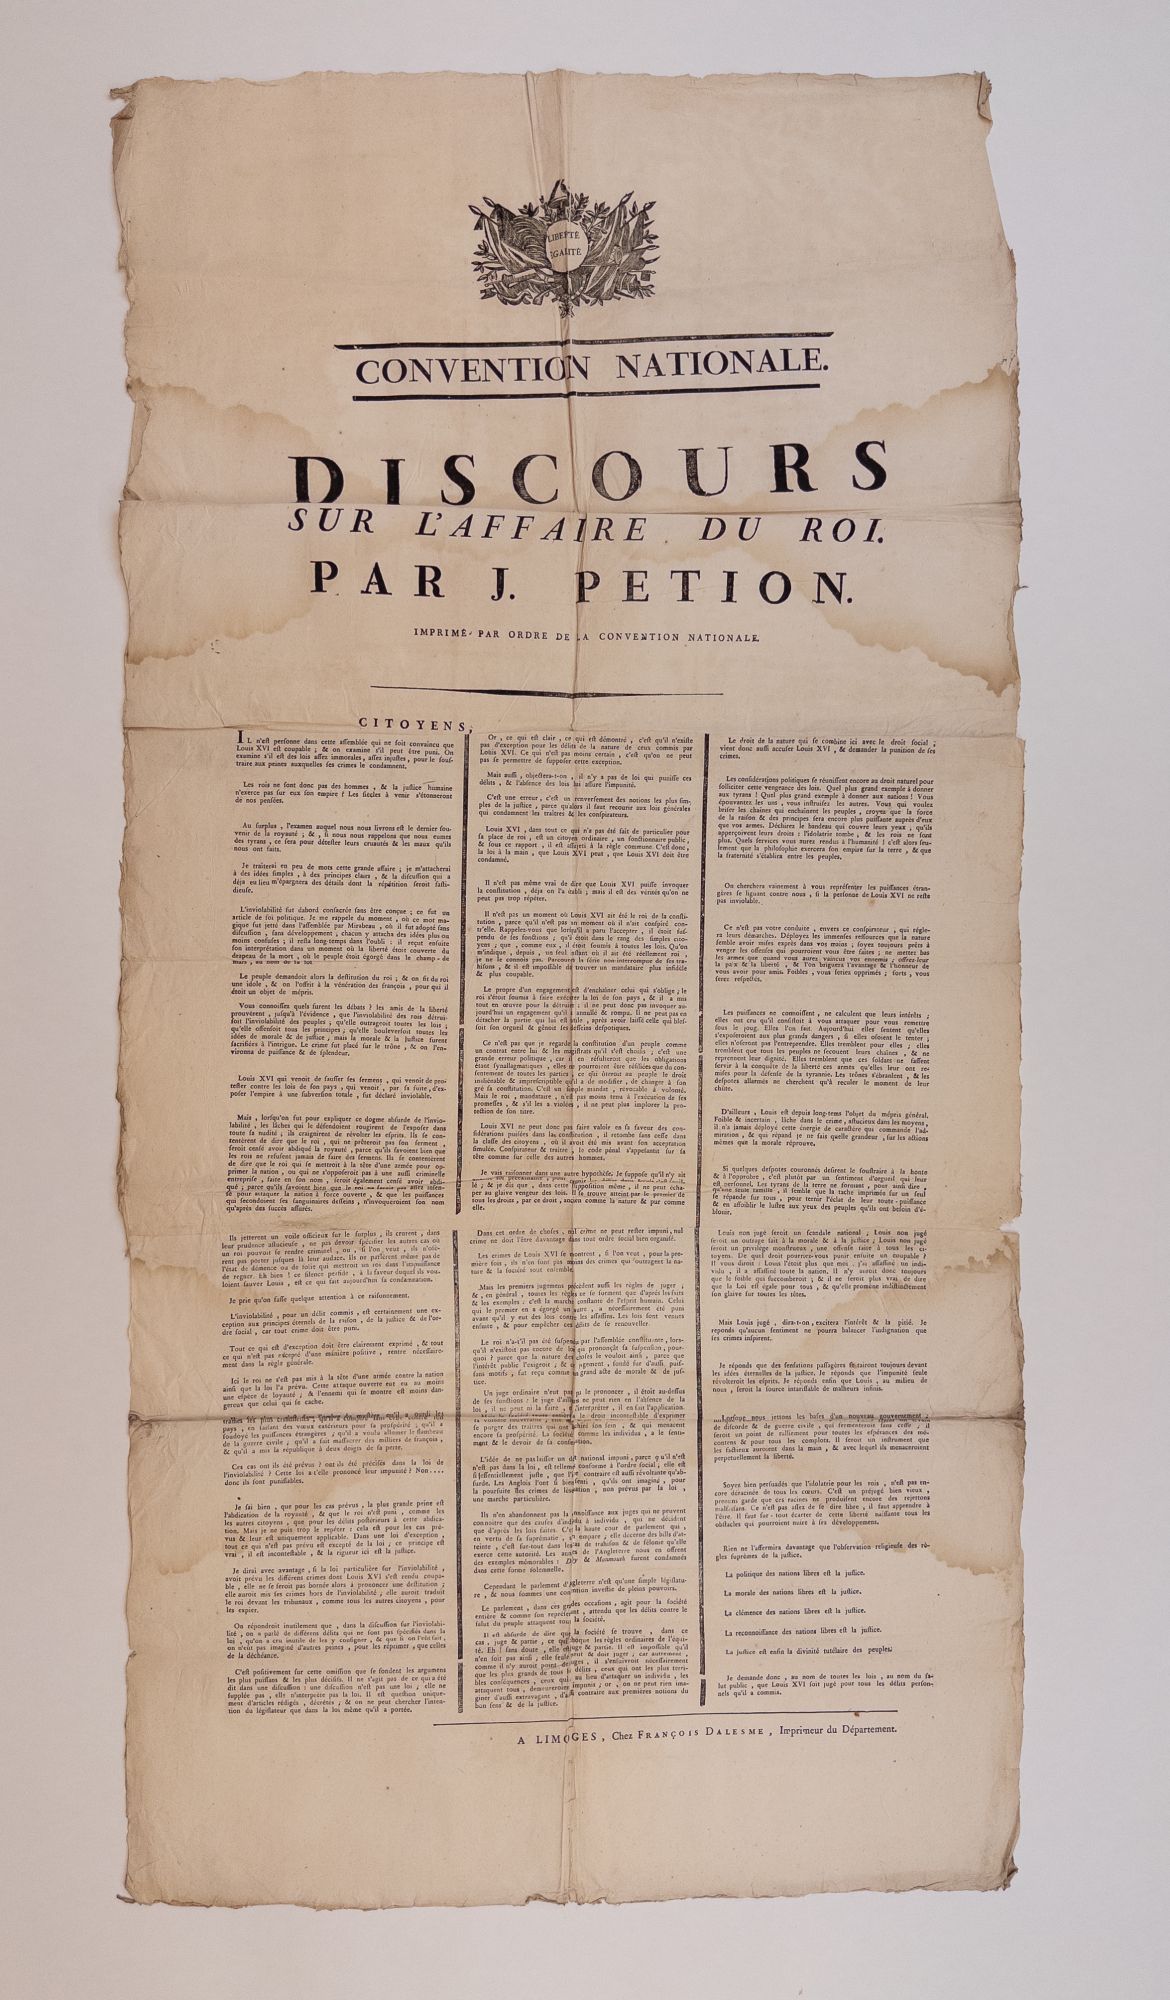 Product Image for THE RUSSELL COLLECTION: BOOKS, BROADSIDES, AND EPHEMERA OF THE FRENCH REVOLUTION